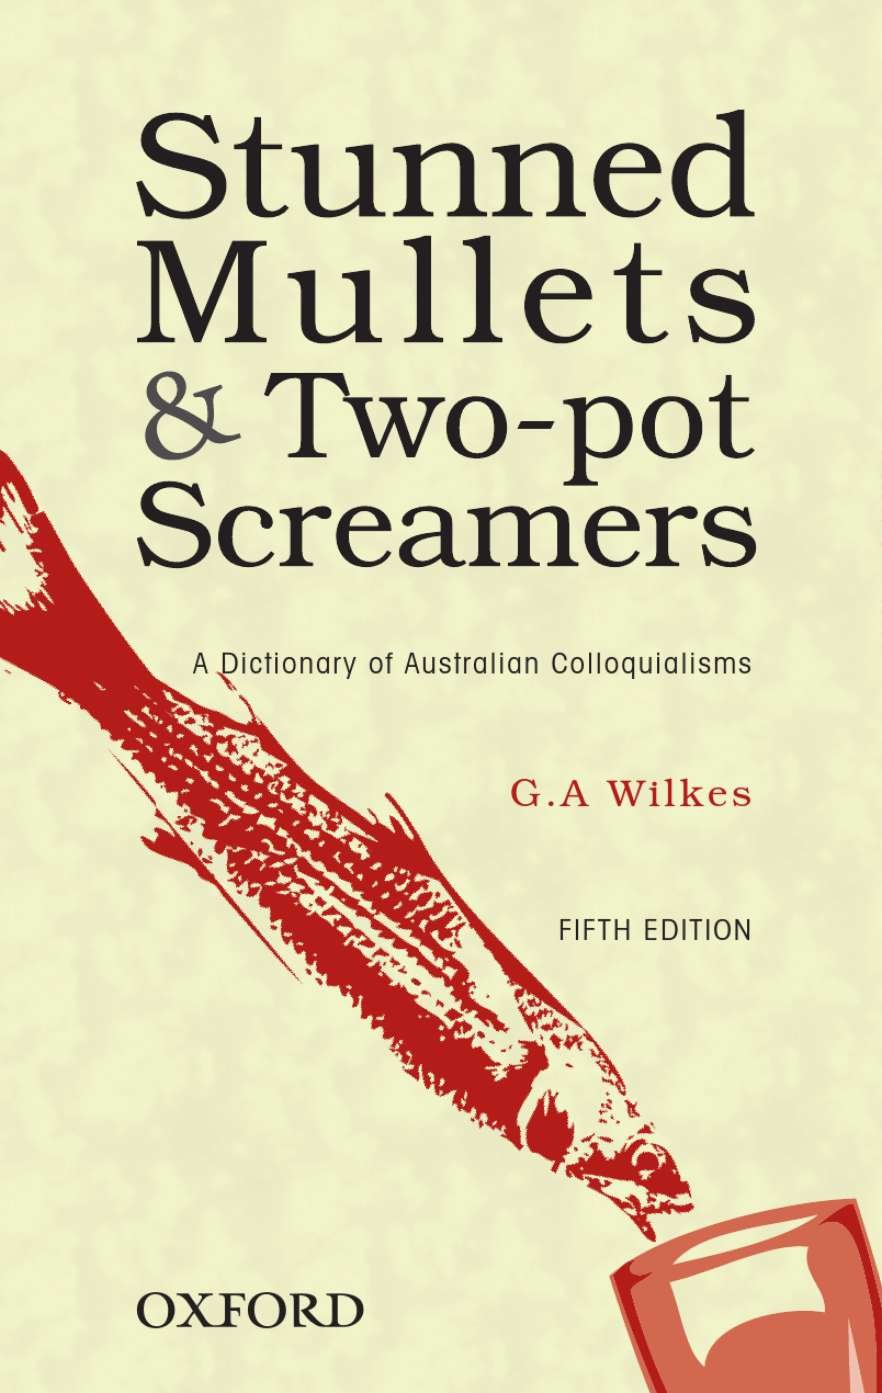 Stunned Mullets and Two-pot Screamers: A dictionary of Australian colloquialisms, Fifth Edition